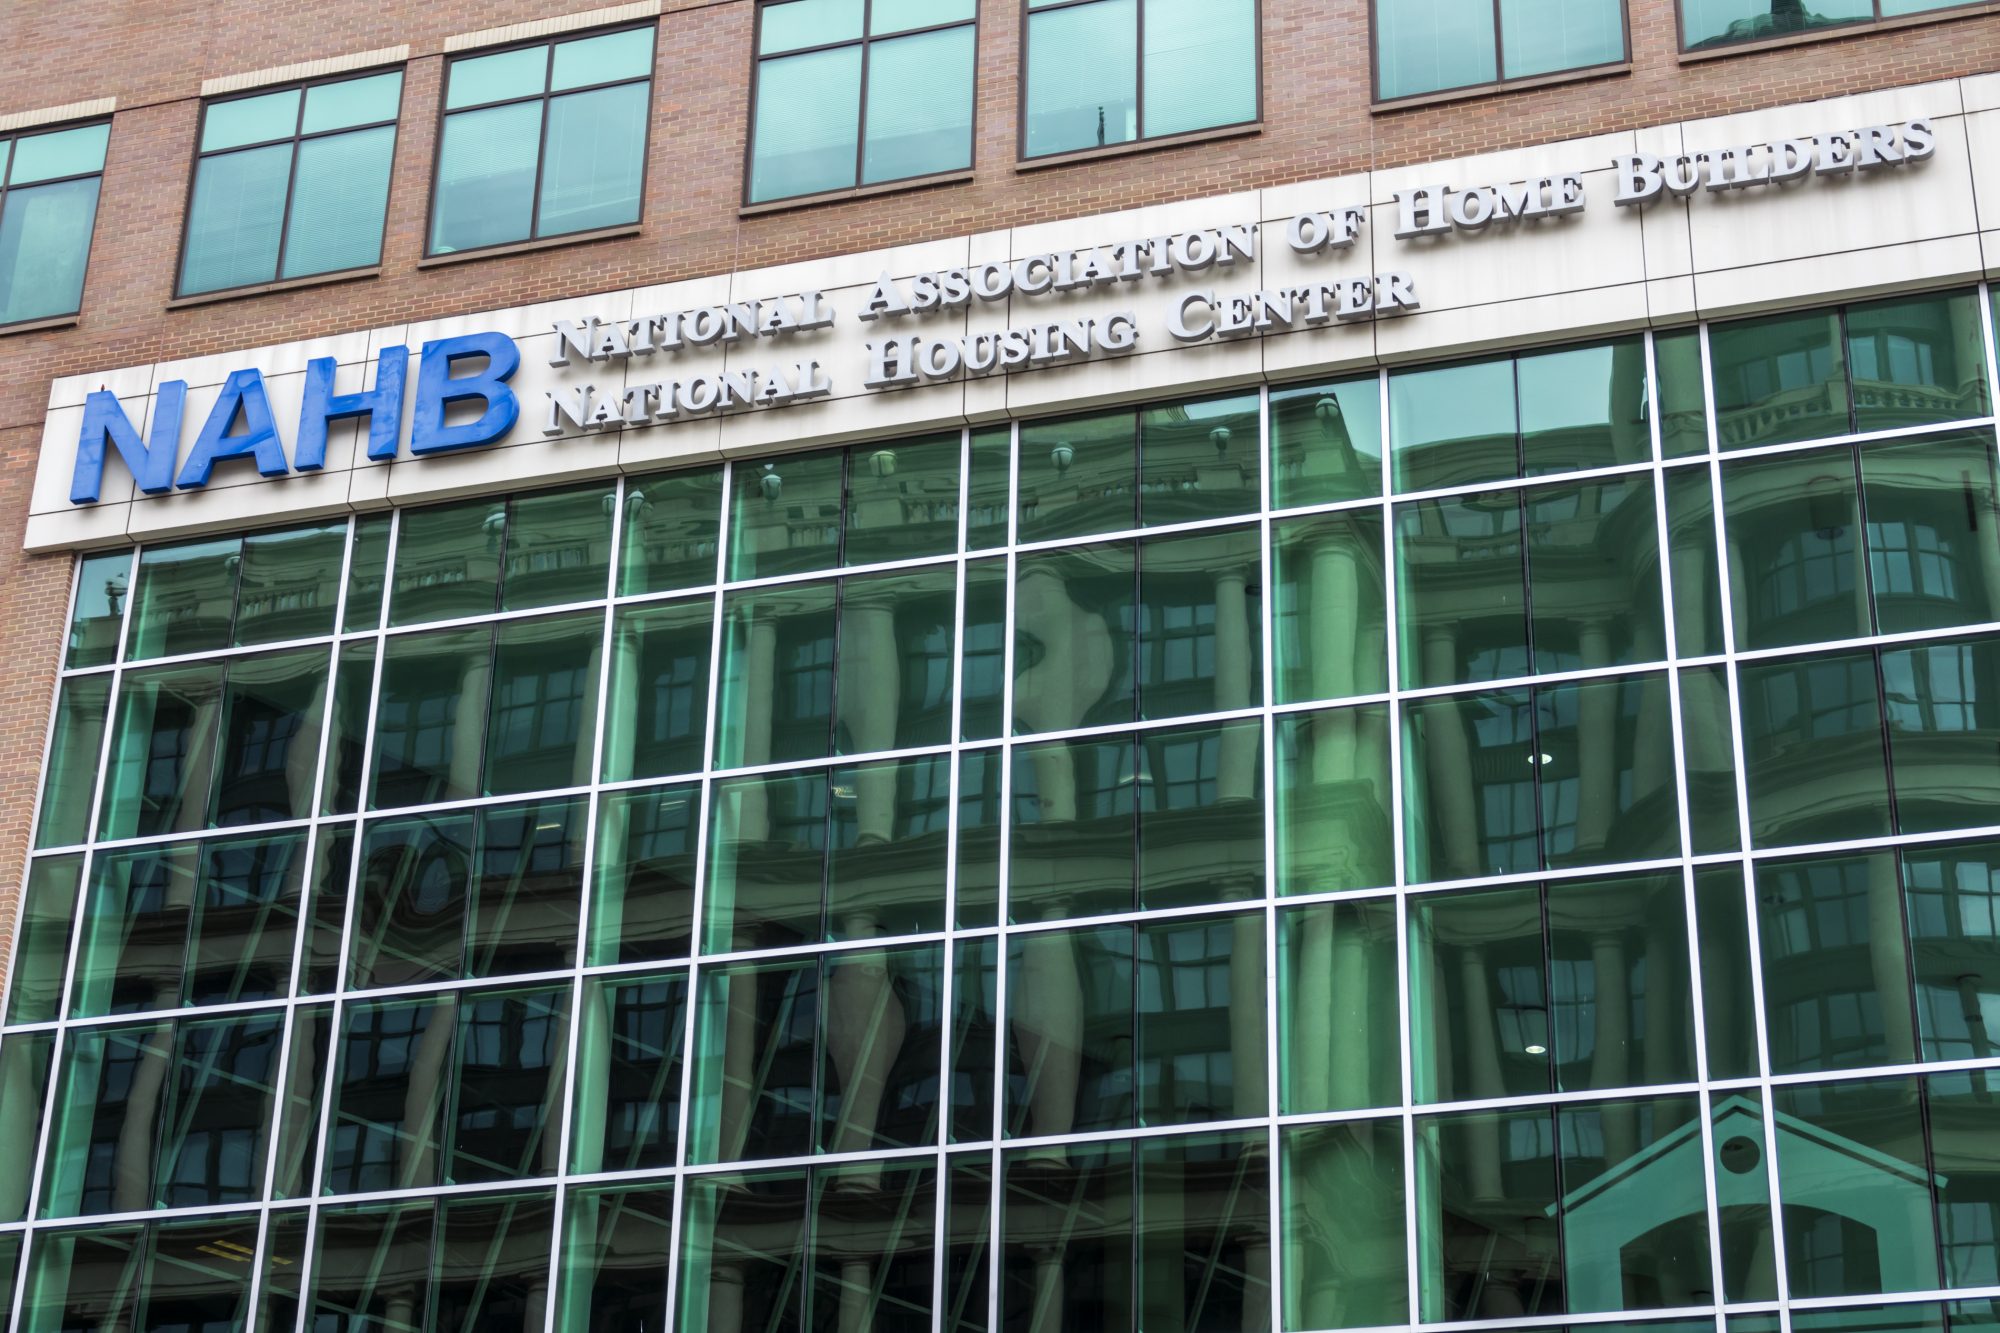 National Association of Home Builders building